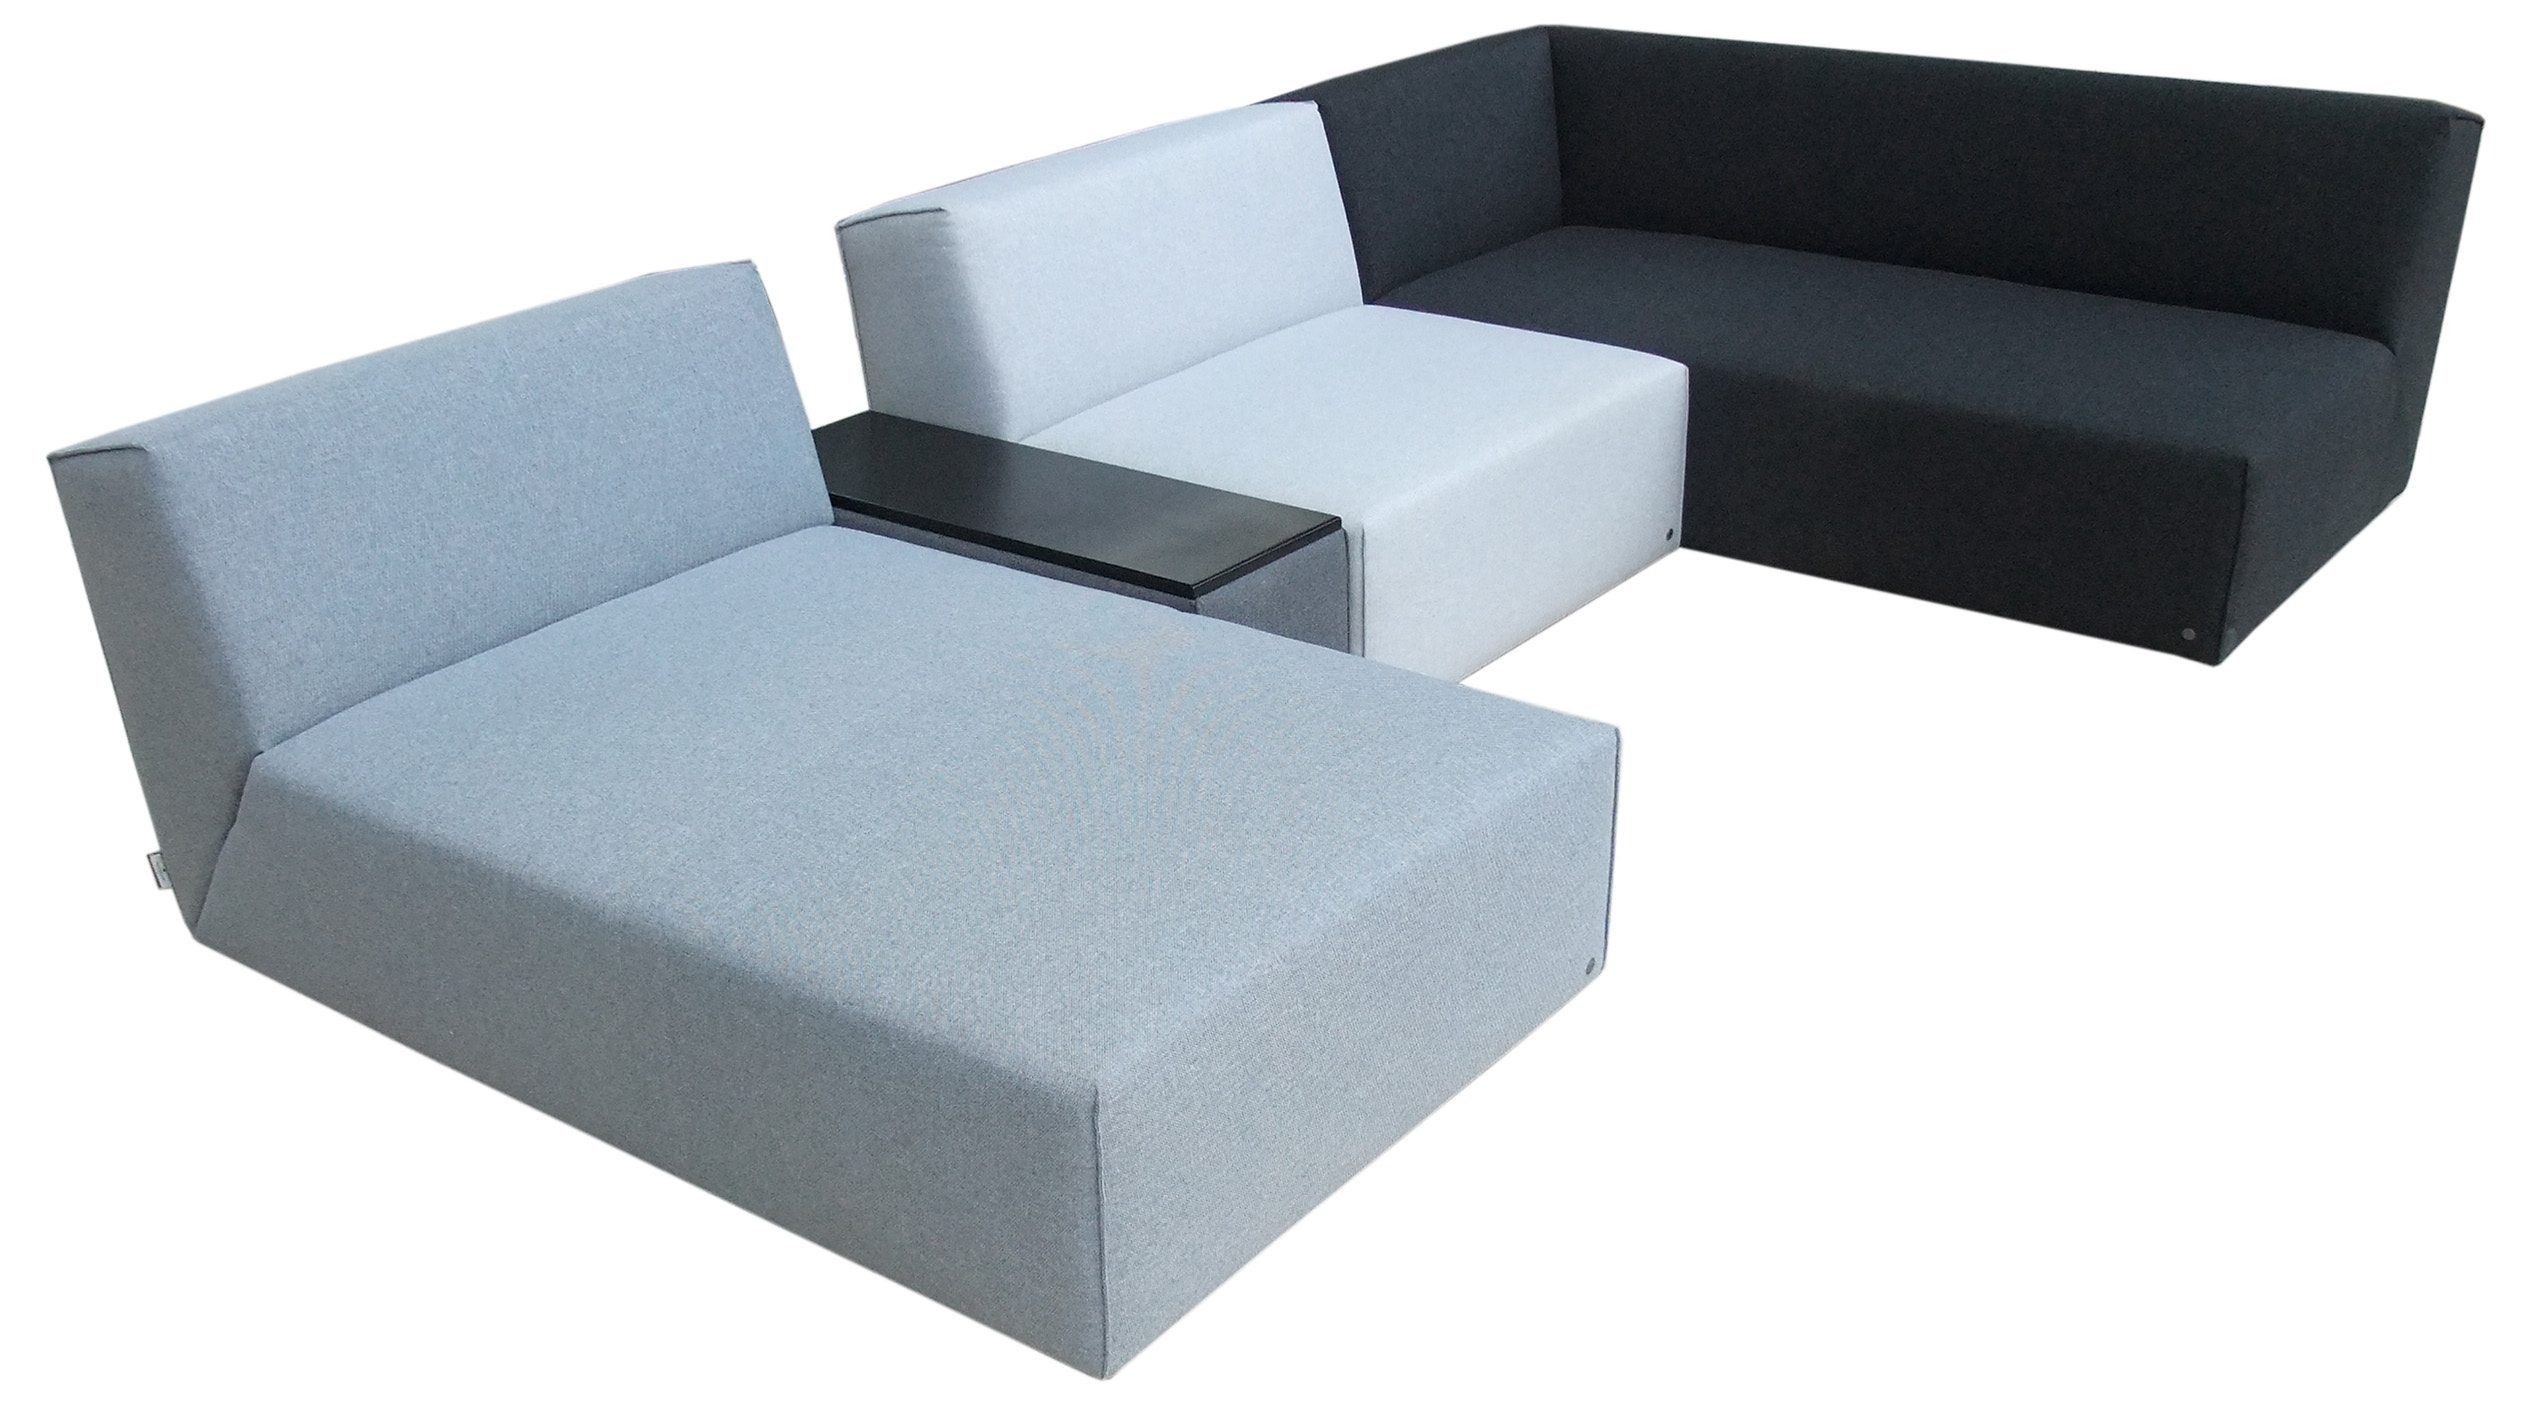 ELEMENTS, Bettfunktion HOME TOM Chaiselongue TAILOR mit Sofaelement wahlweise